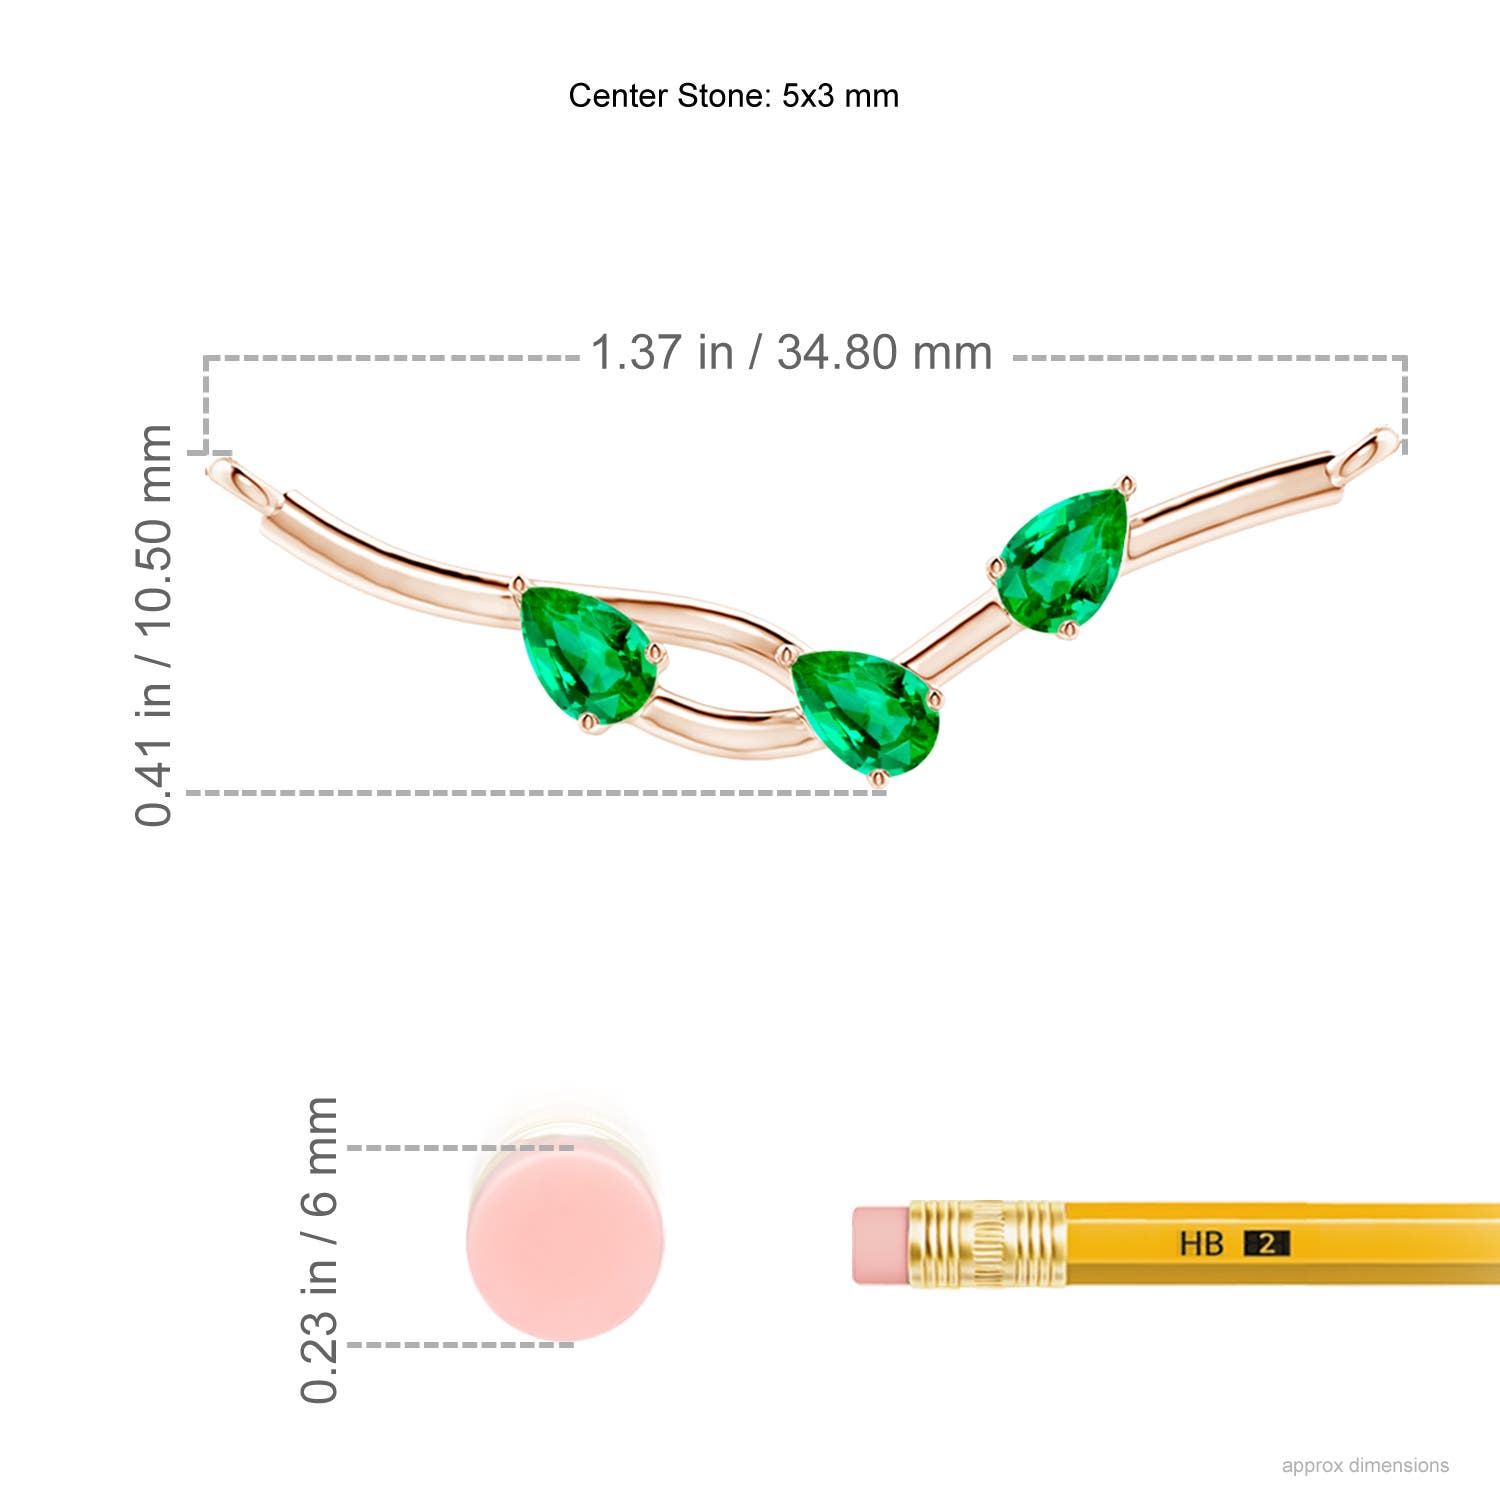 AAA - Emerald / 0.6 CT / 14 KT Rose Gold